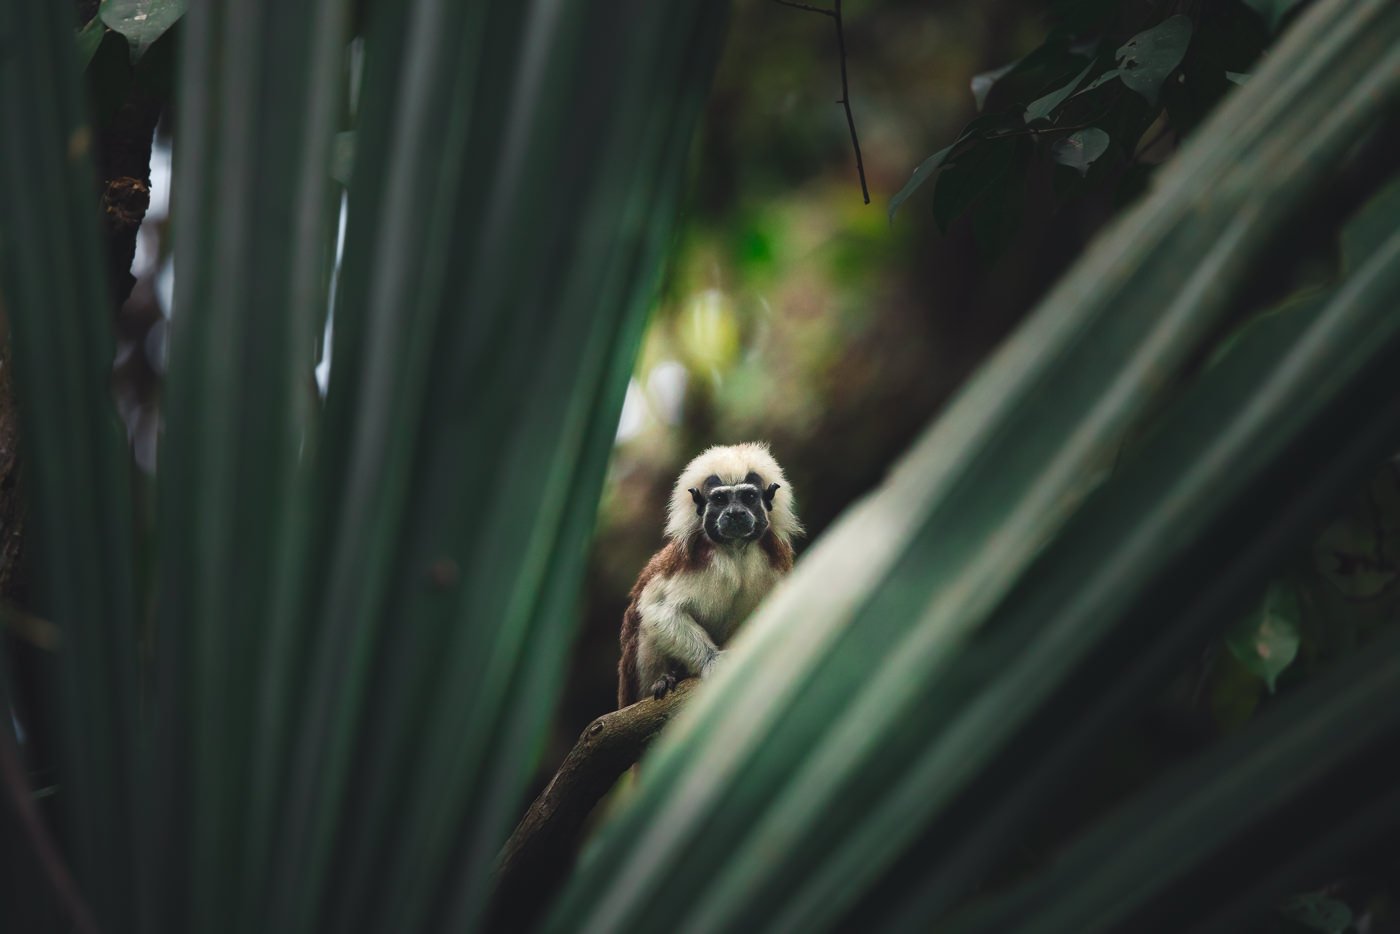 Cotton top tamarin monkey in Tayrona National Park, Colombia